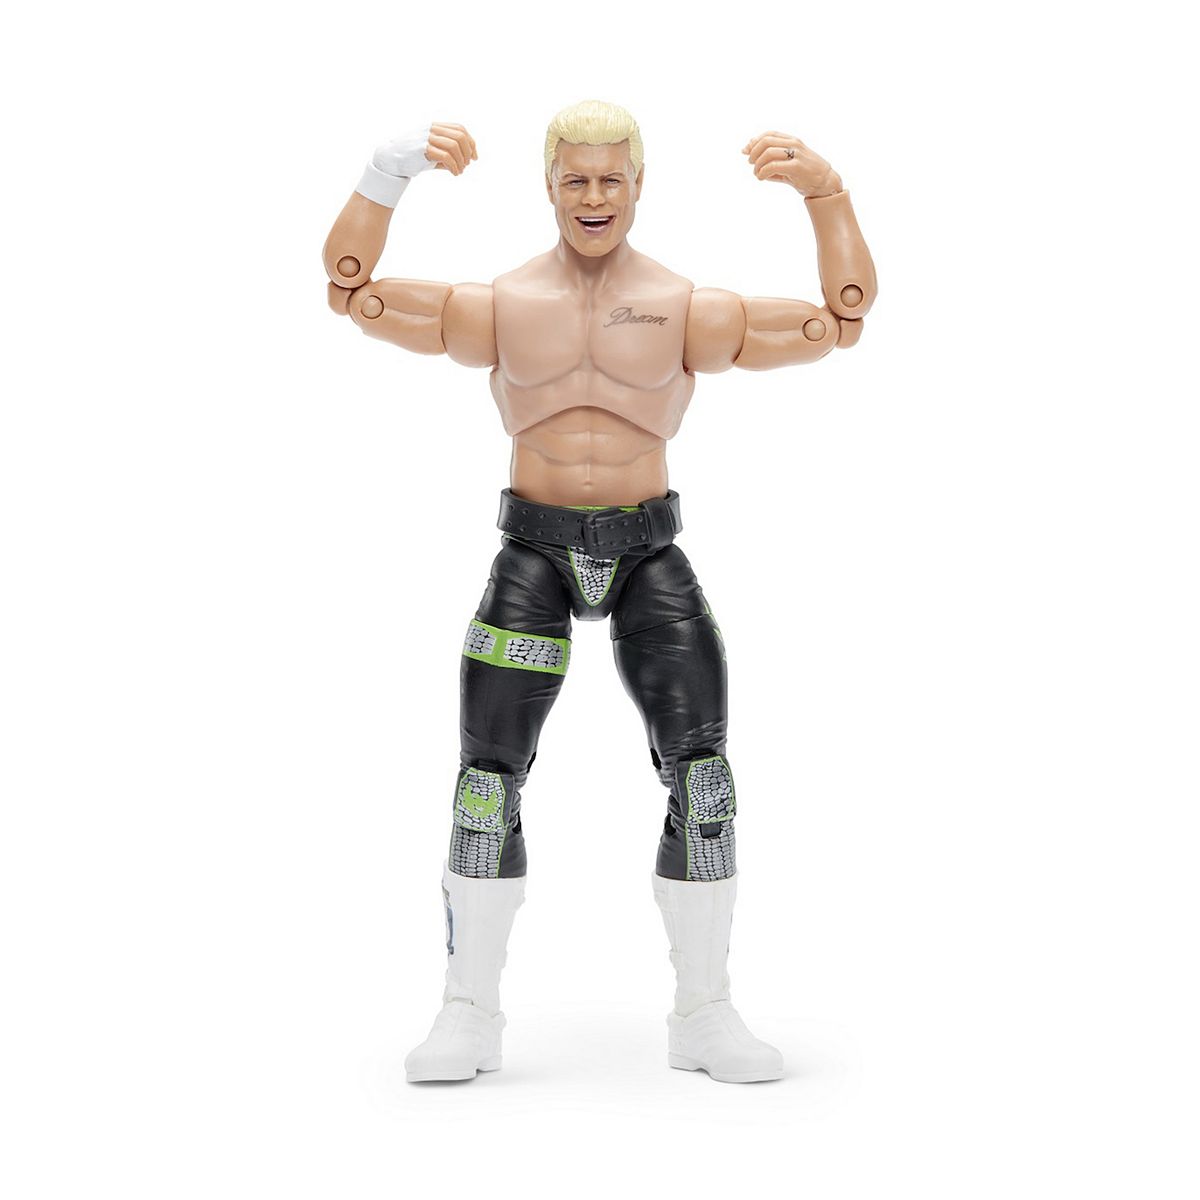 2021 AEW Jazwares Unrivaled Collection Series 4 #29 Cody